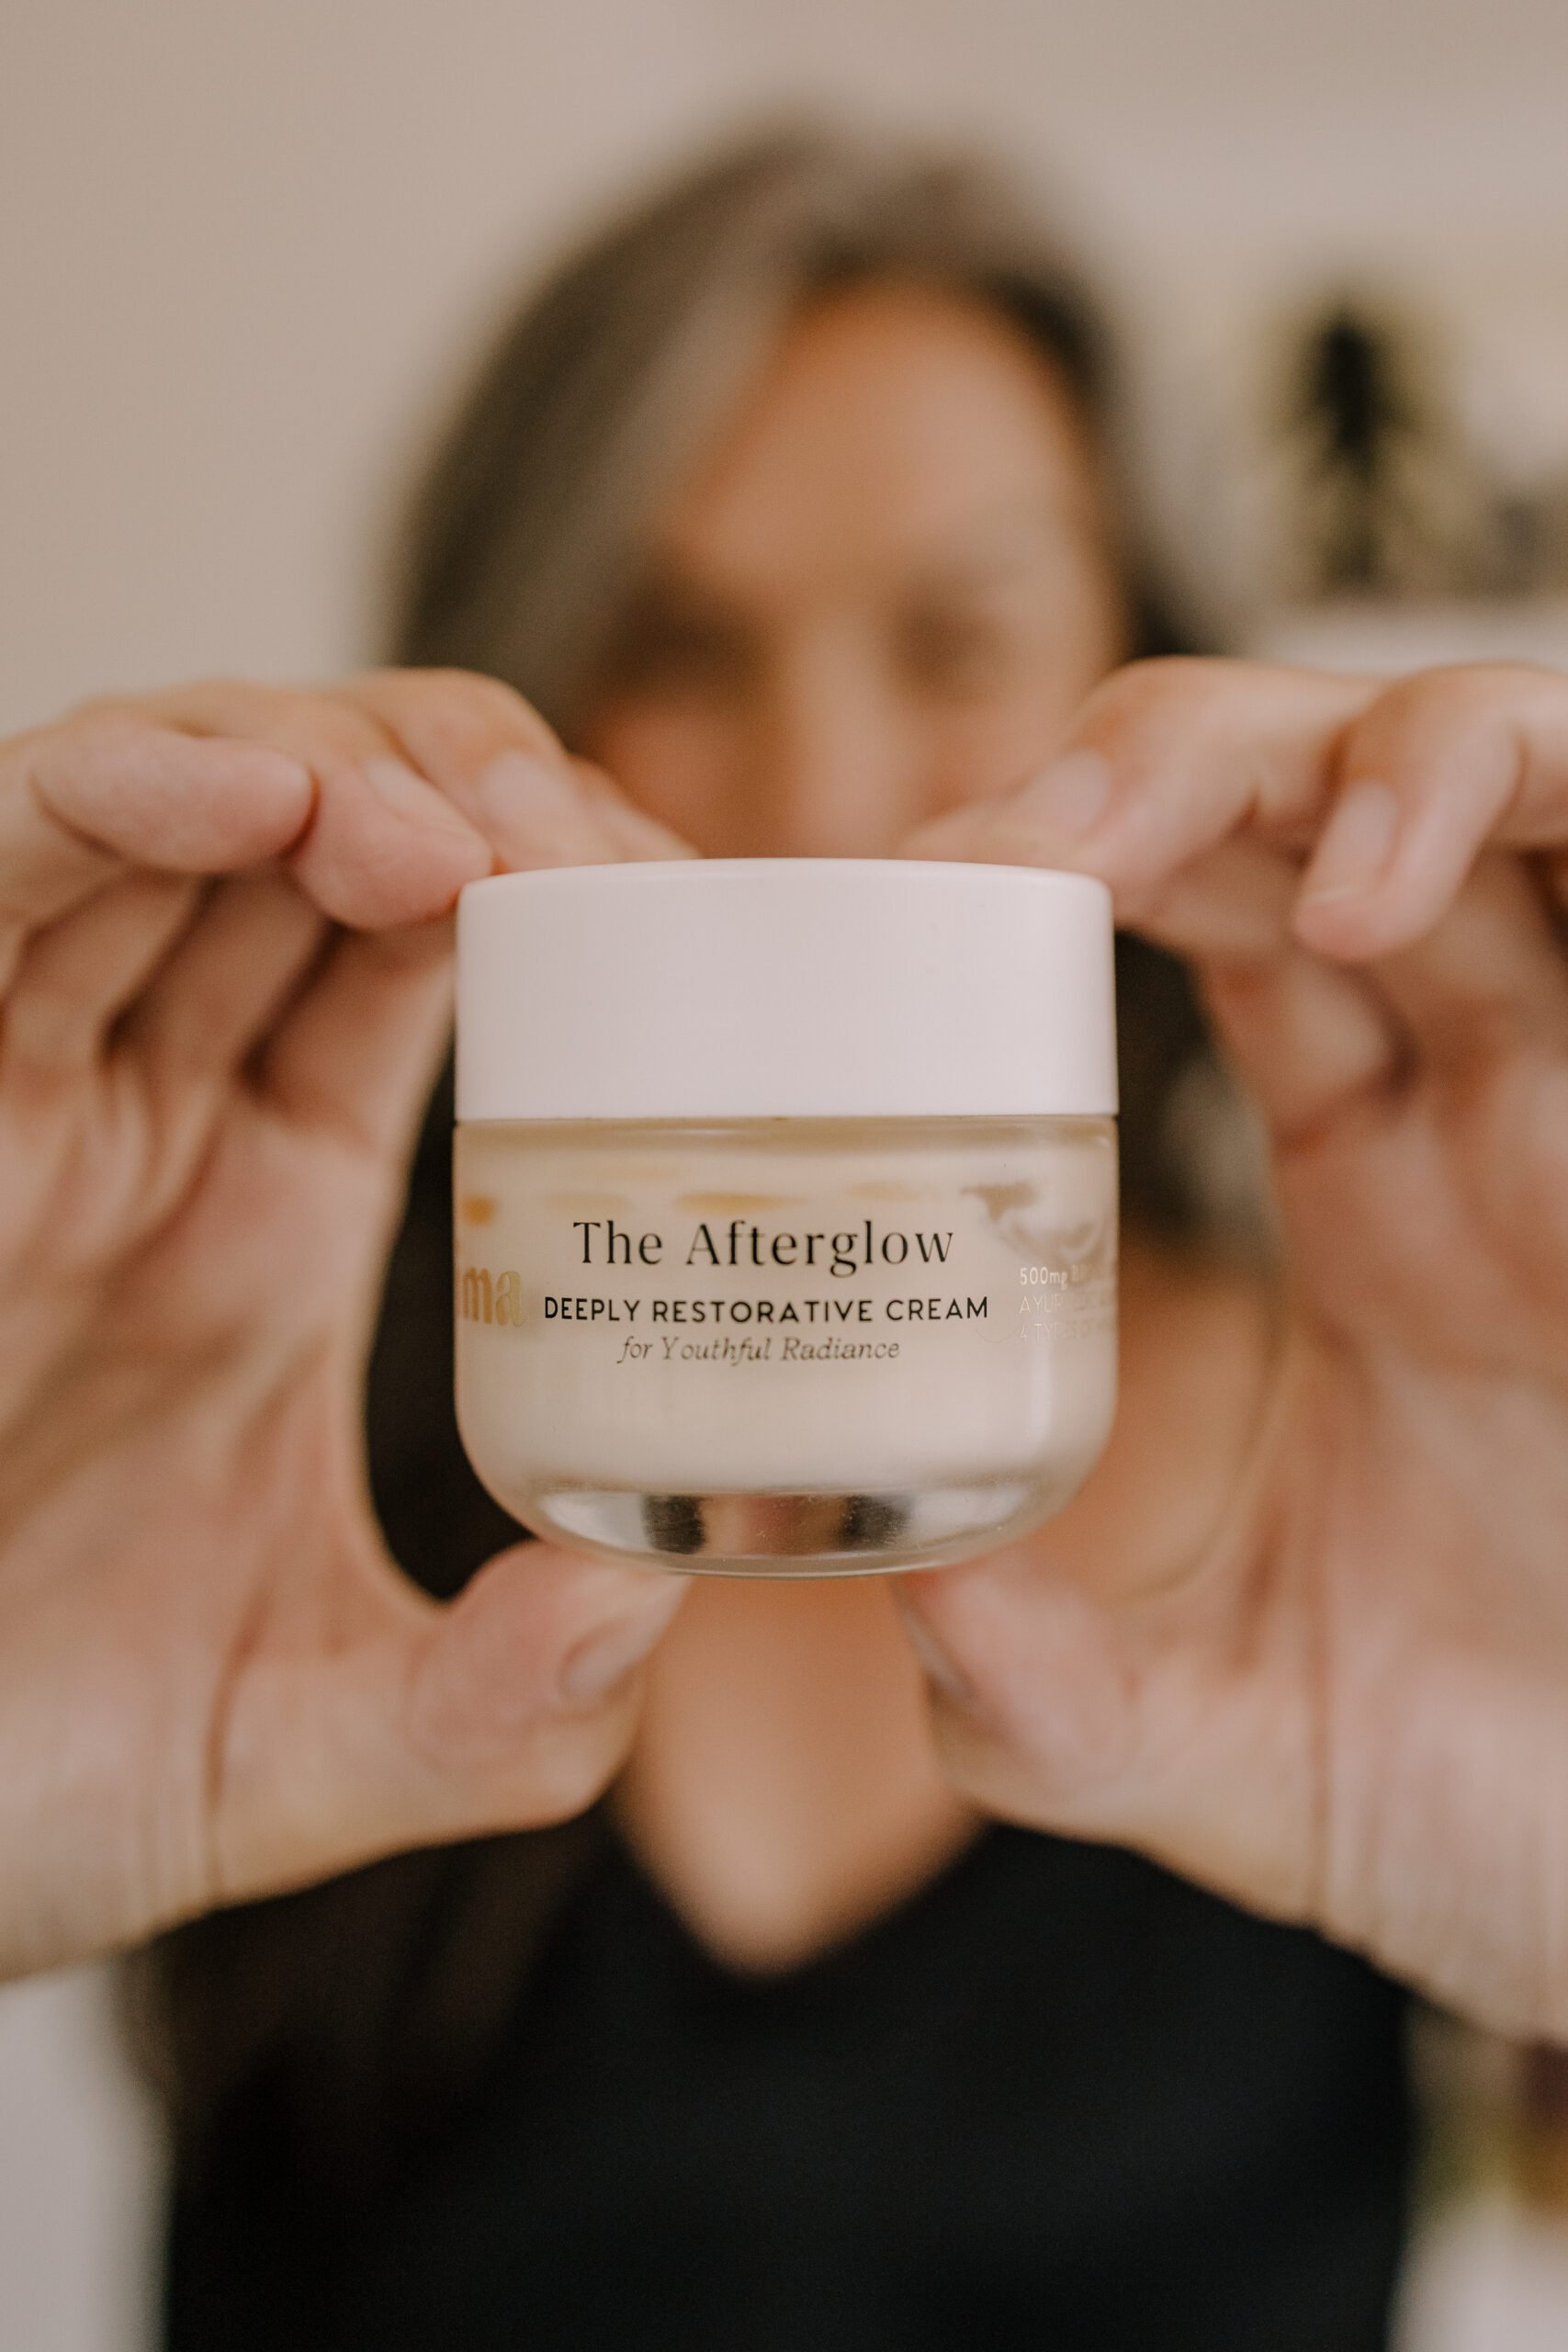 a woman in the background holds up a tub of Prima's The Afterglow moisturizer